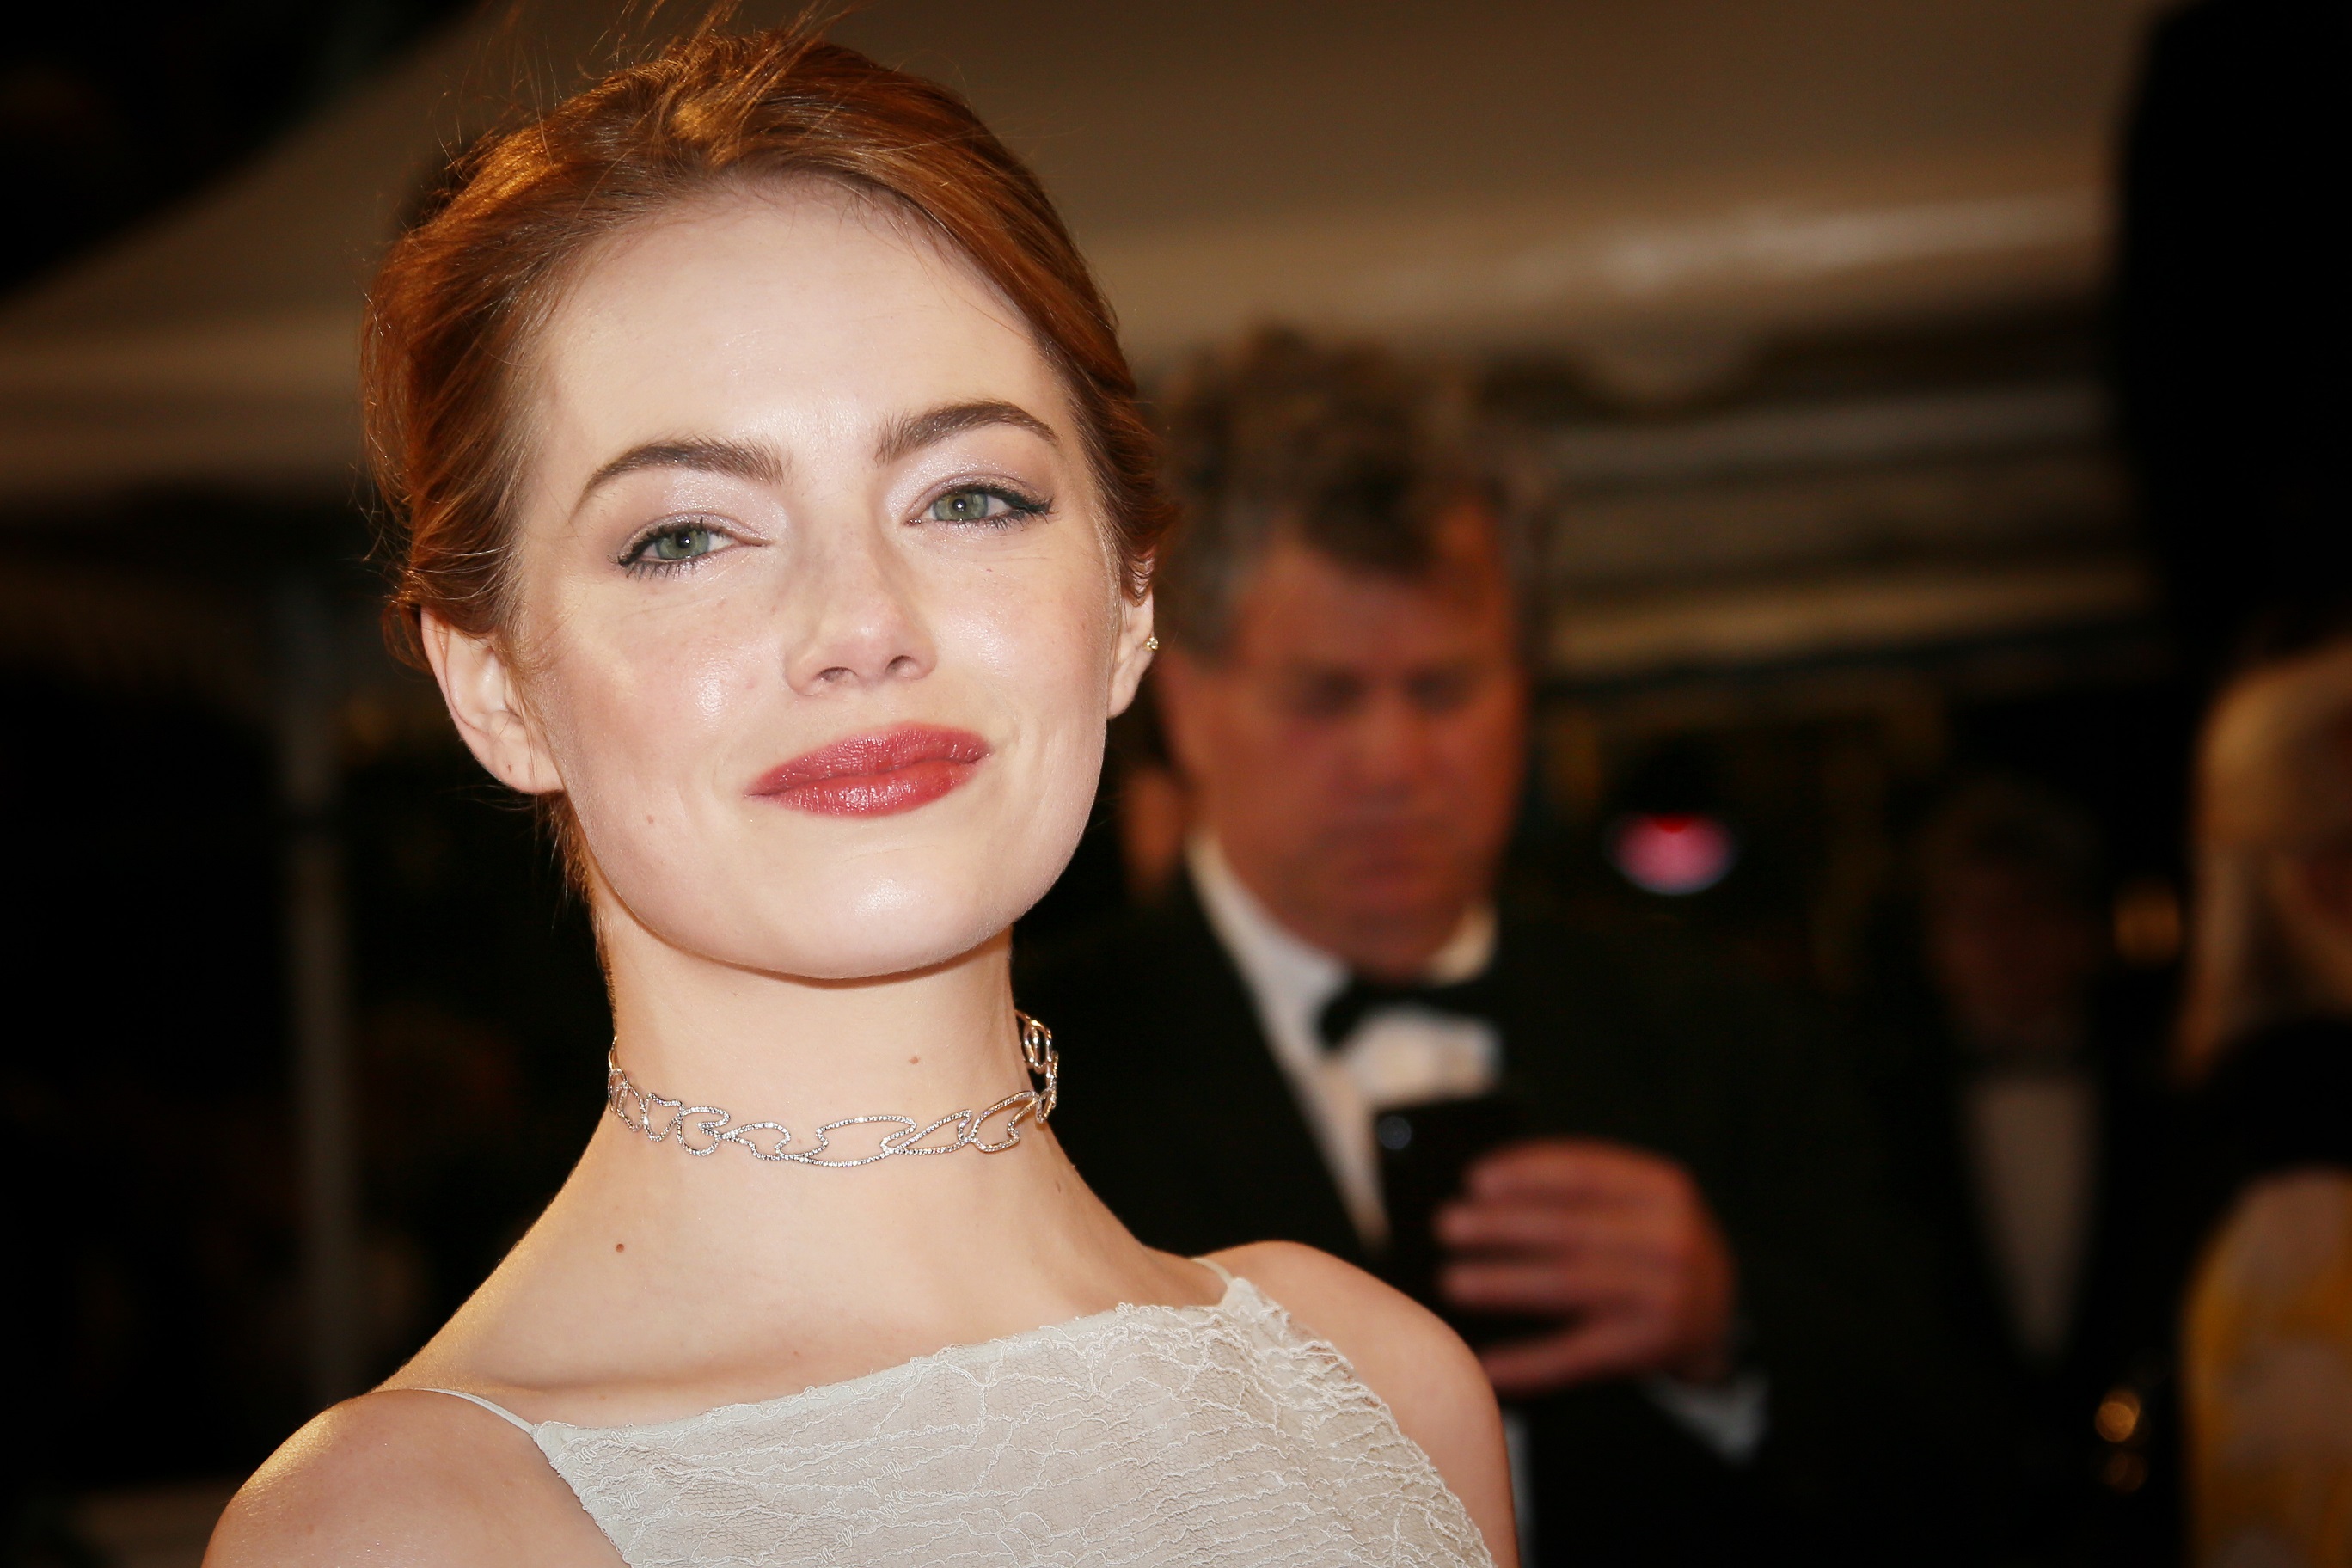 40 Incredible Things You Didn't Know About Emma Stone